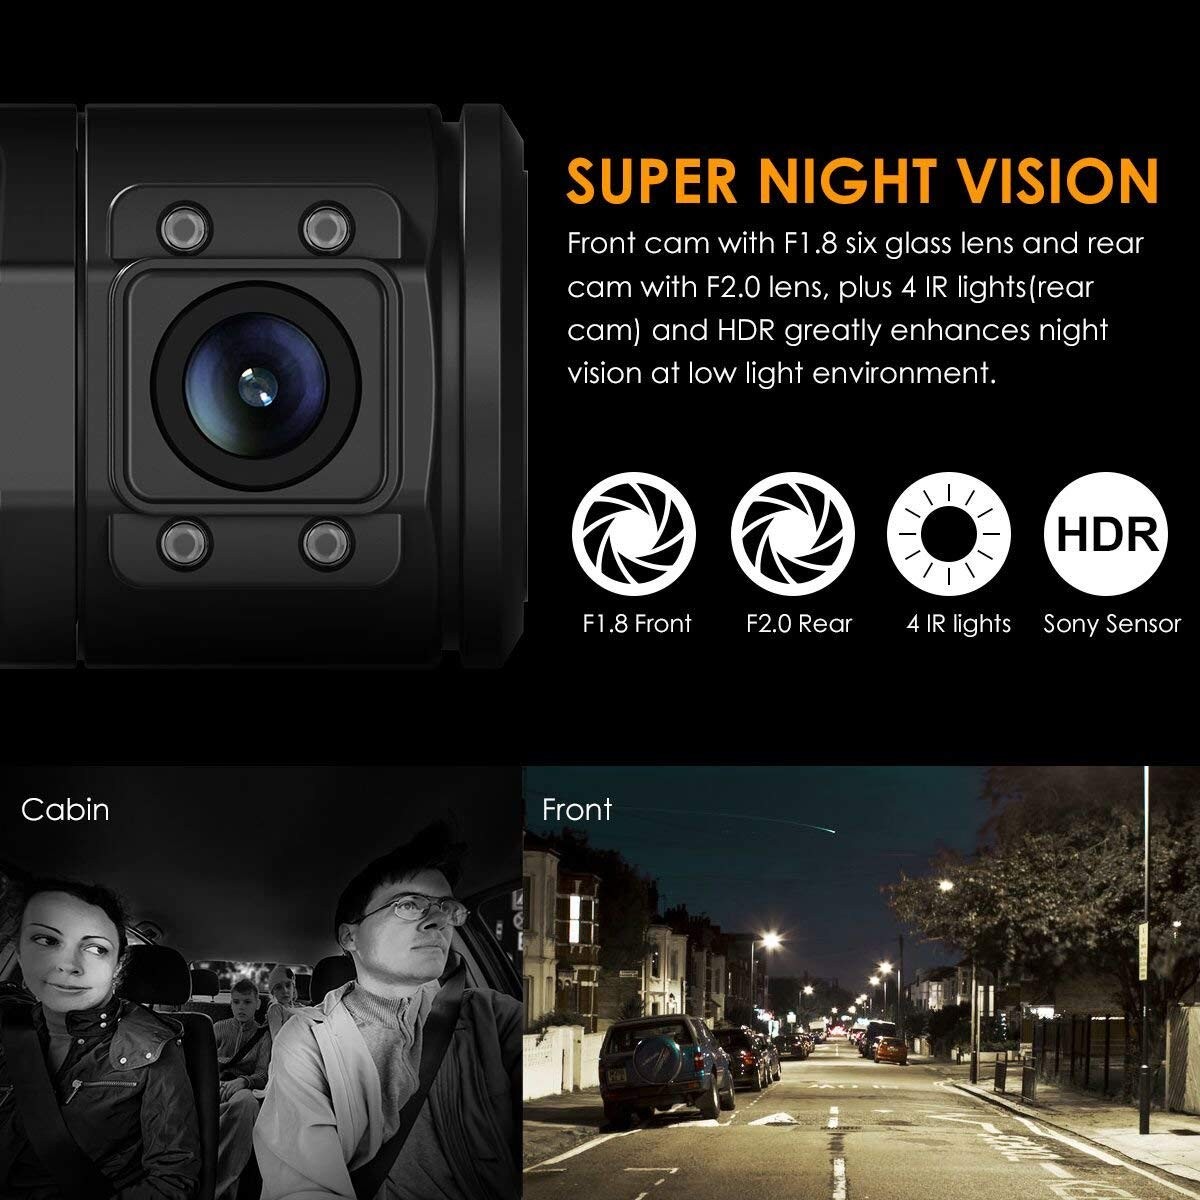 in-Cabin & Road Cam Buying Advance HQ Quality Dual DashCam with 8 Infra RED Lights Super Night Vision:1920X1080P HD+GPS,Unbeatable:-5F°~150F°,Wide Angle,G-Sensor,Motion Detect&Free Kingston 32GB SD BBS Electronics 